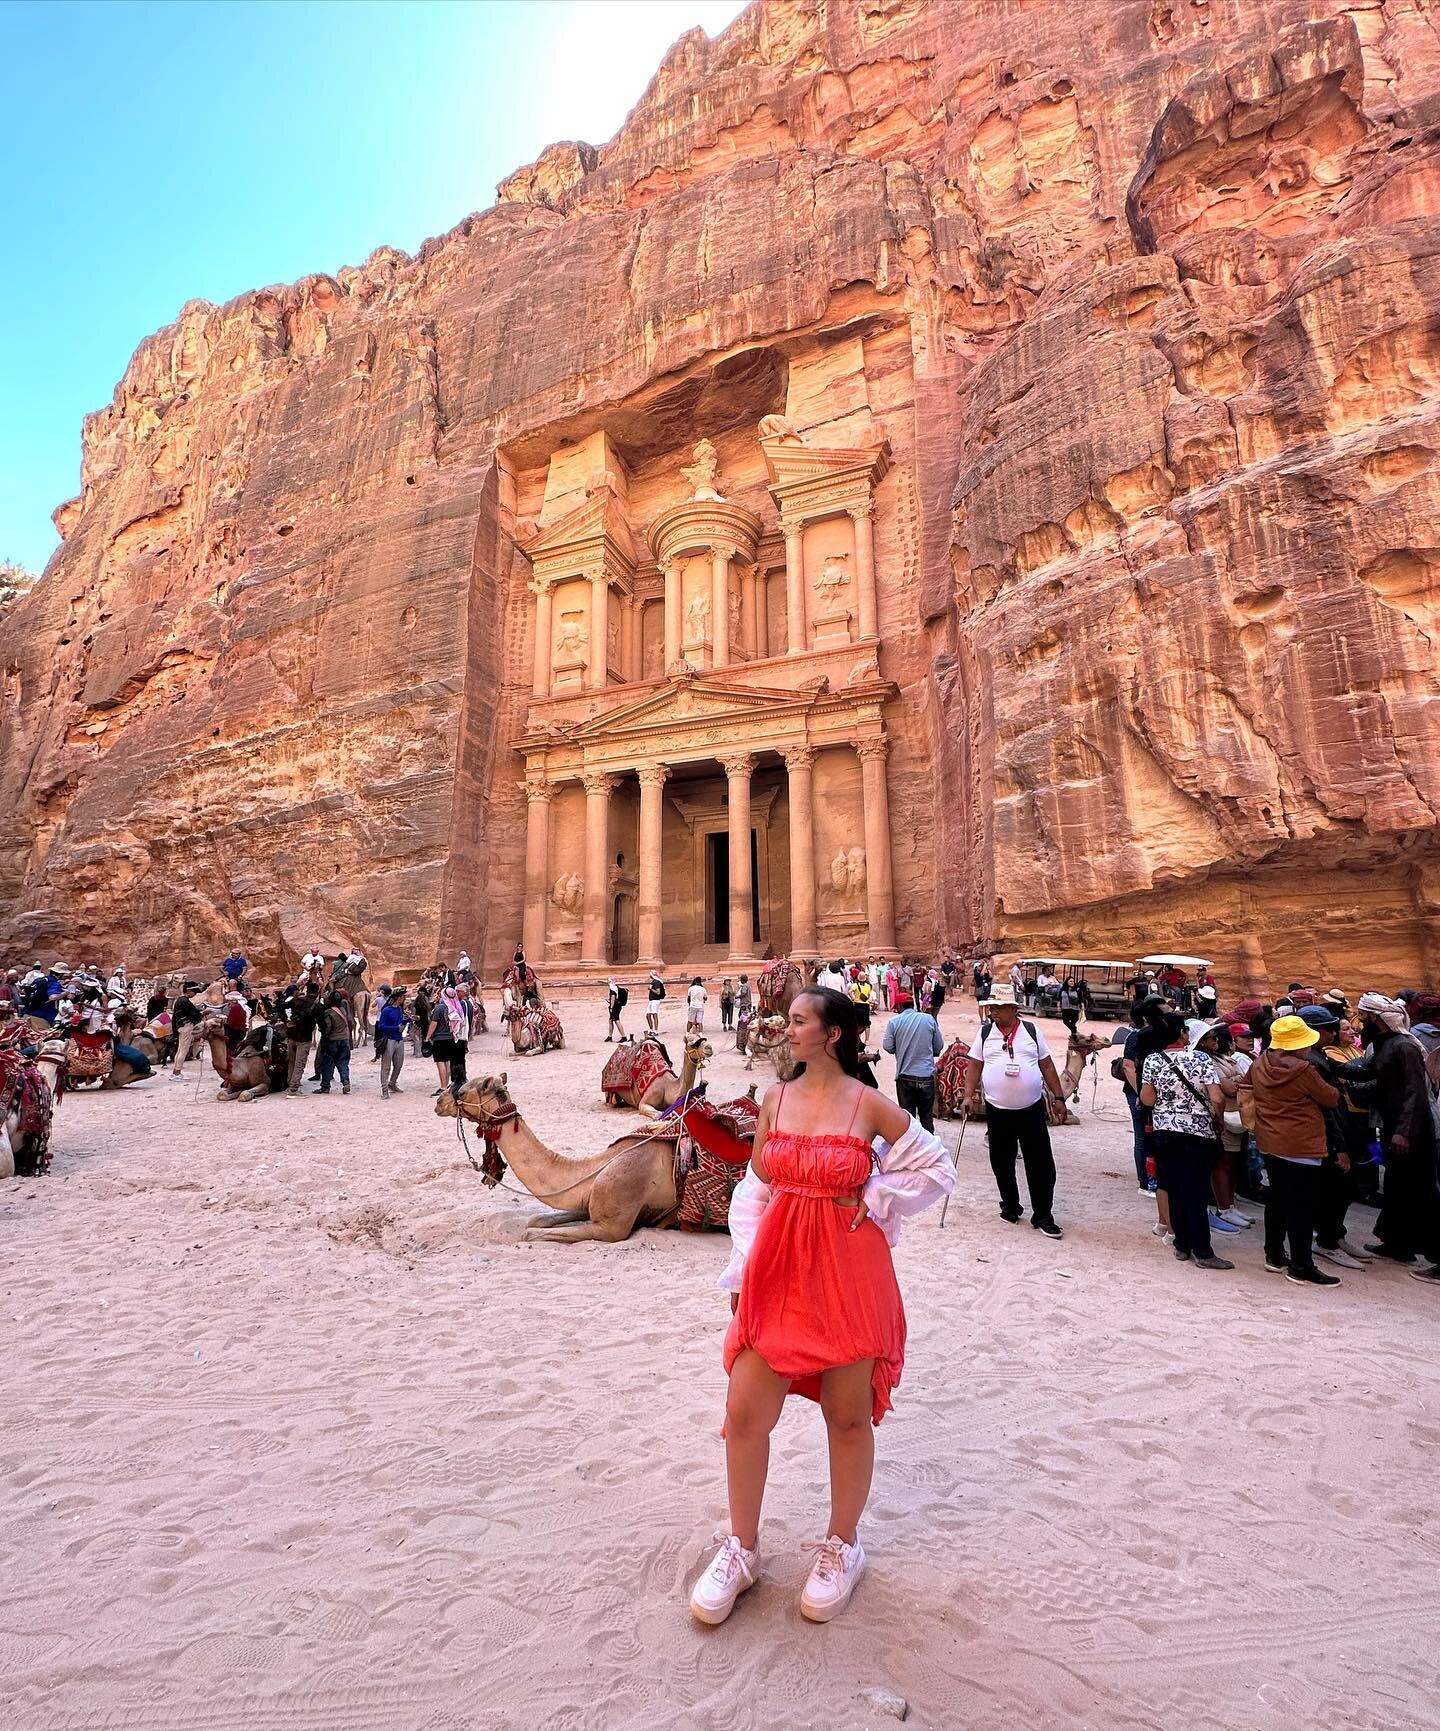 ✨33 🎈
&bull;
Just me and 500 other tourists trying to see this Wonder of the World. Blessed and grateful.
&bull;
#petra #petrajordan #visitjordan #instagramvsreality